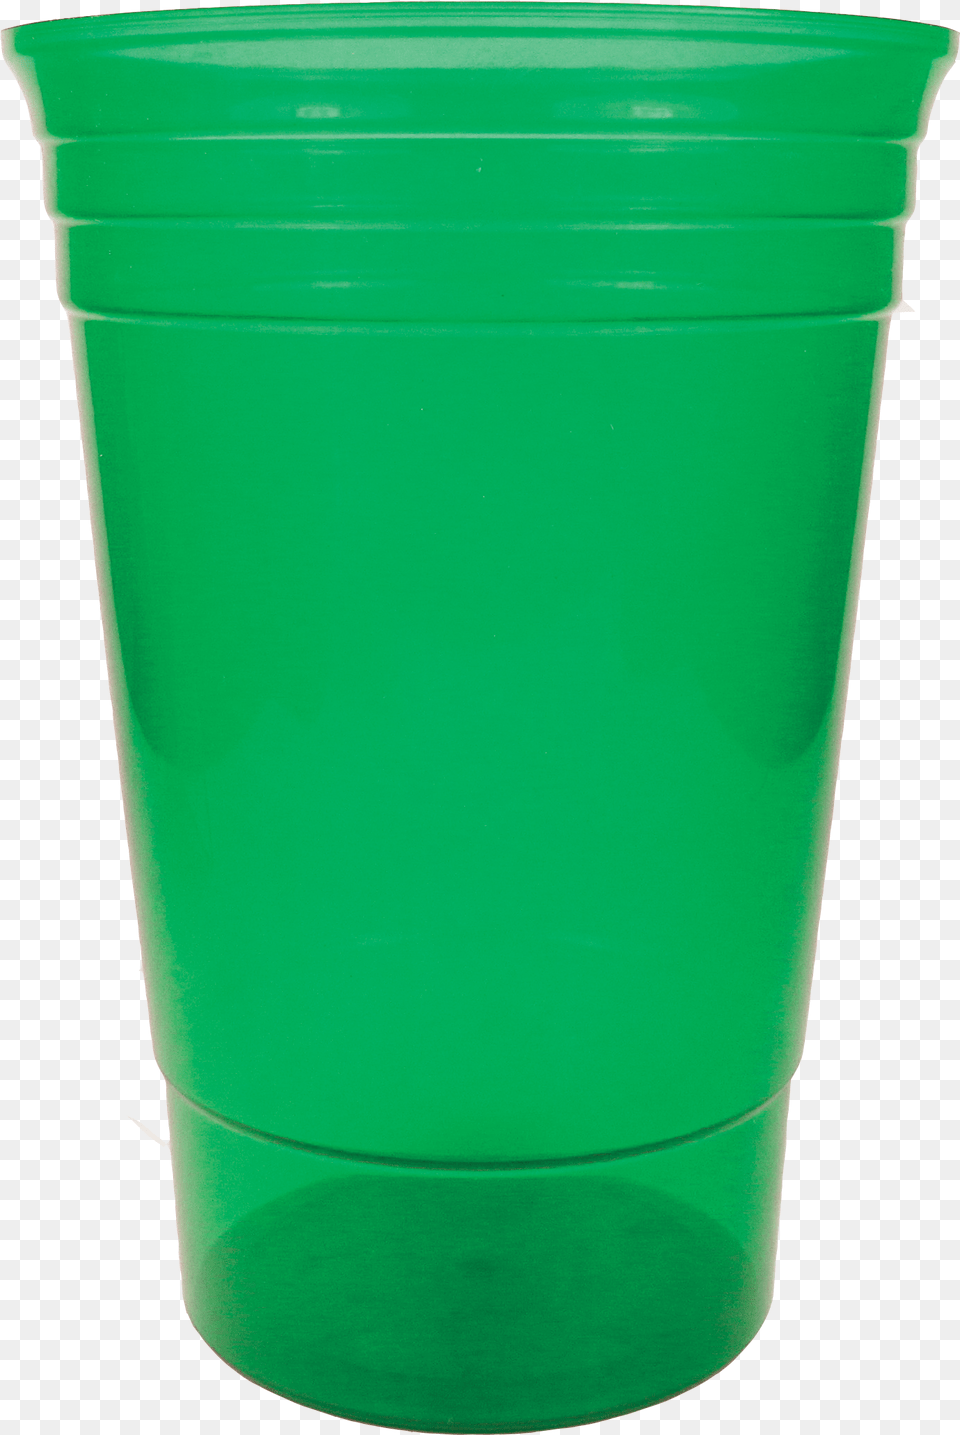 Dc 20 Designer Cup Green Plastic Cup Free Png Download